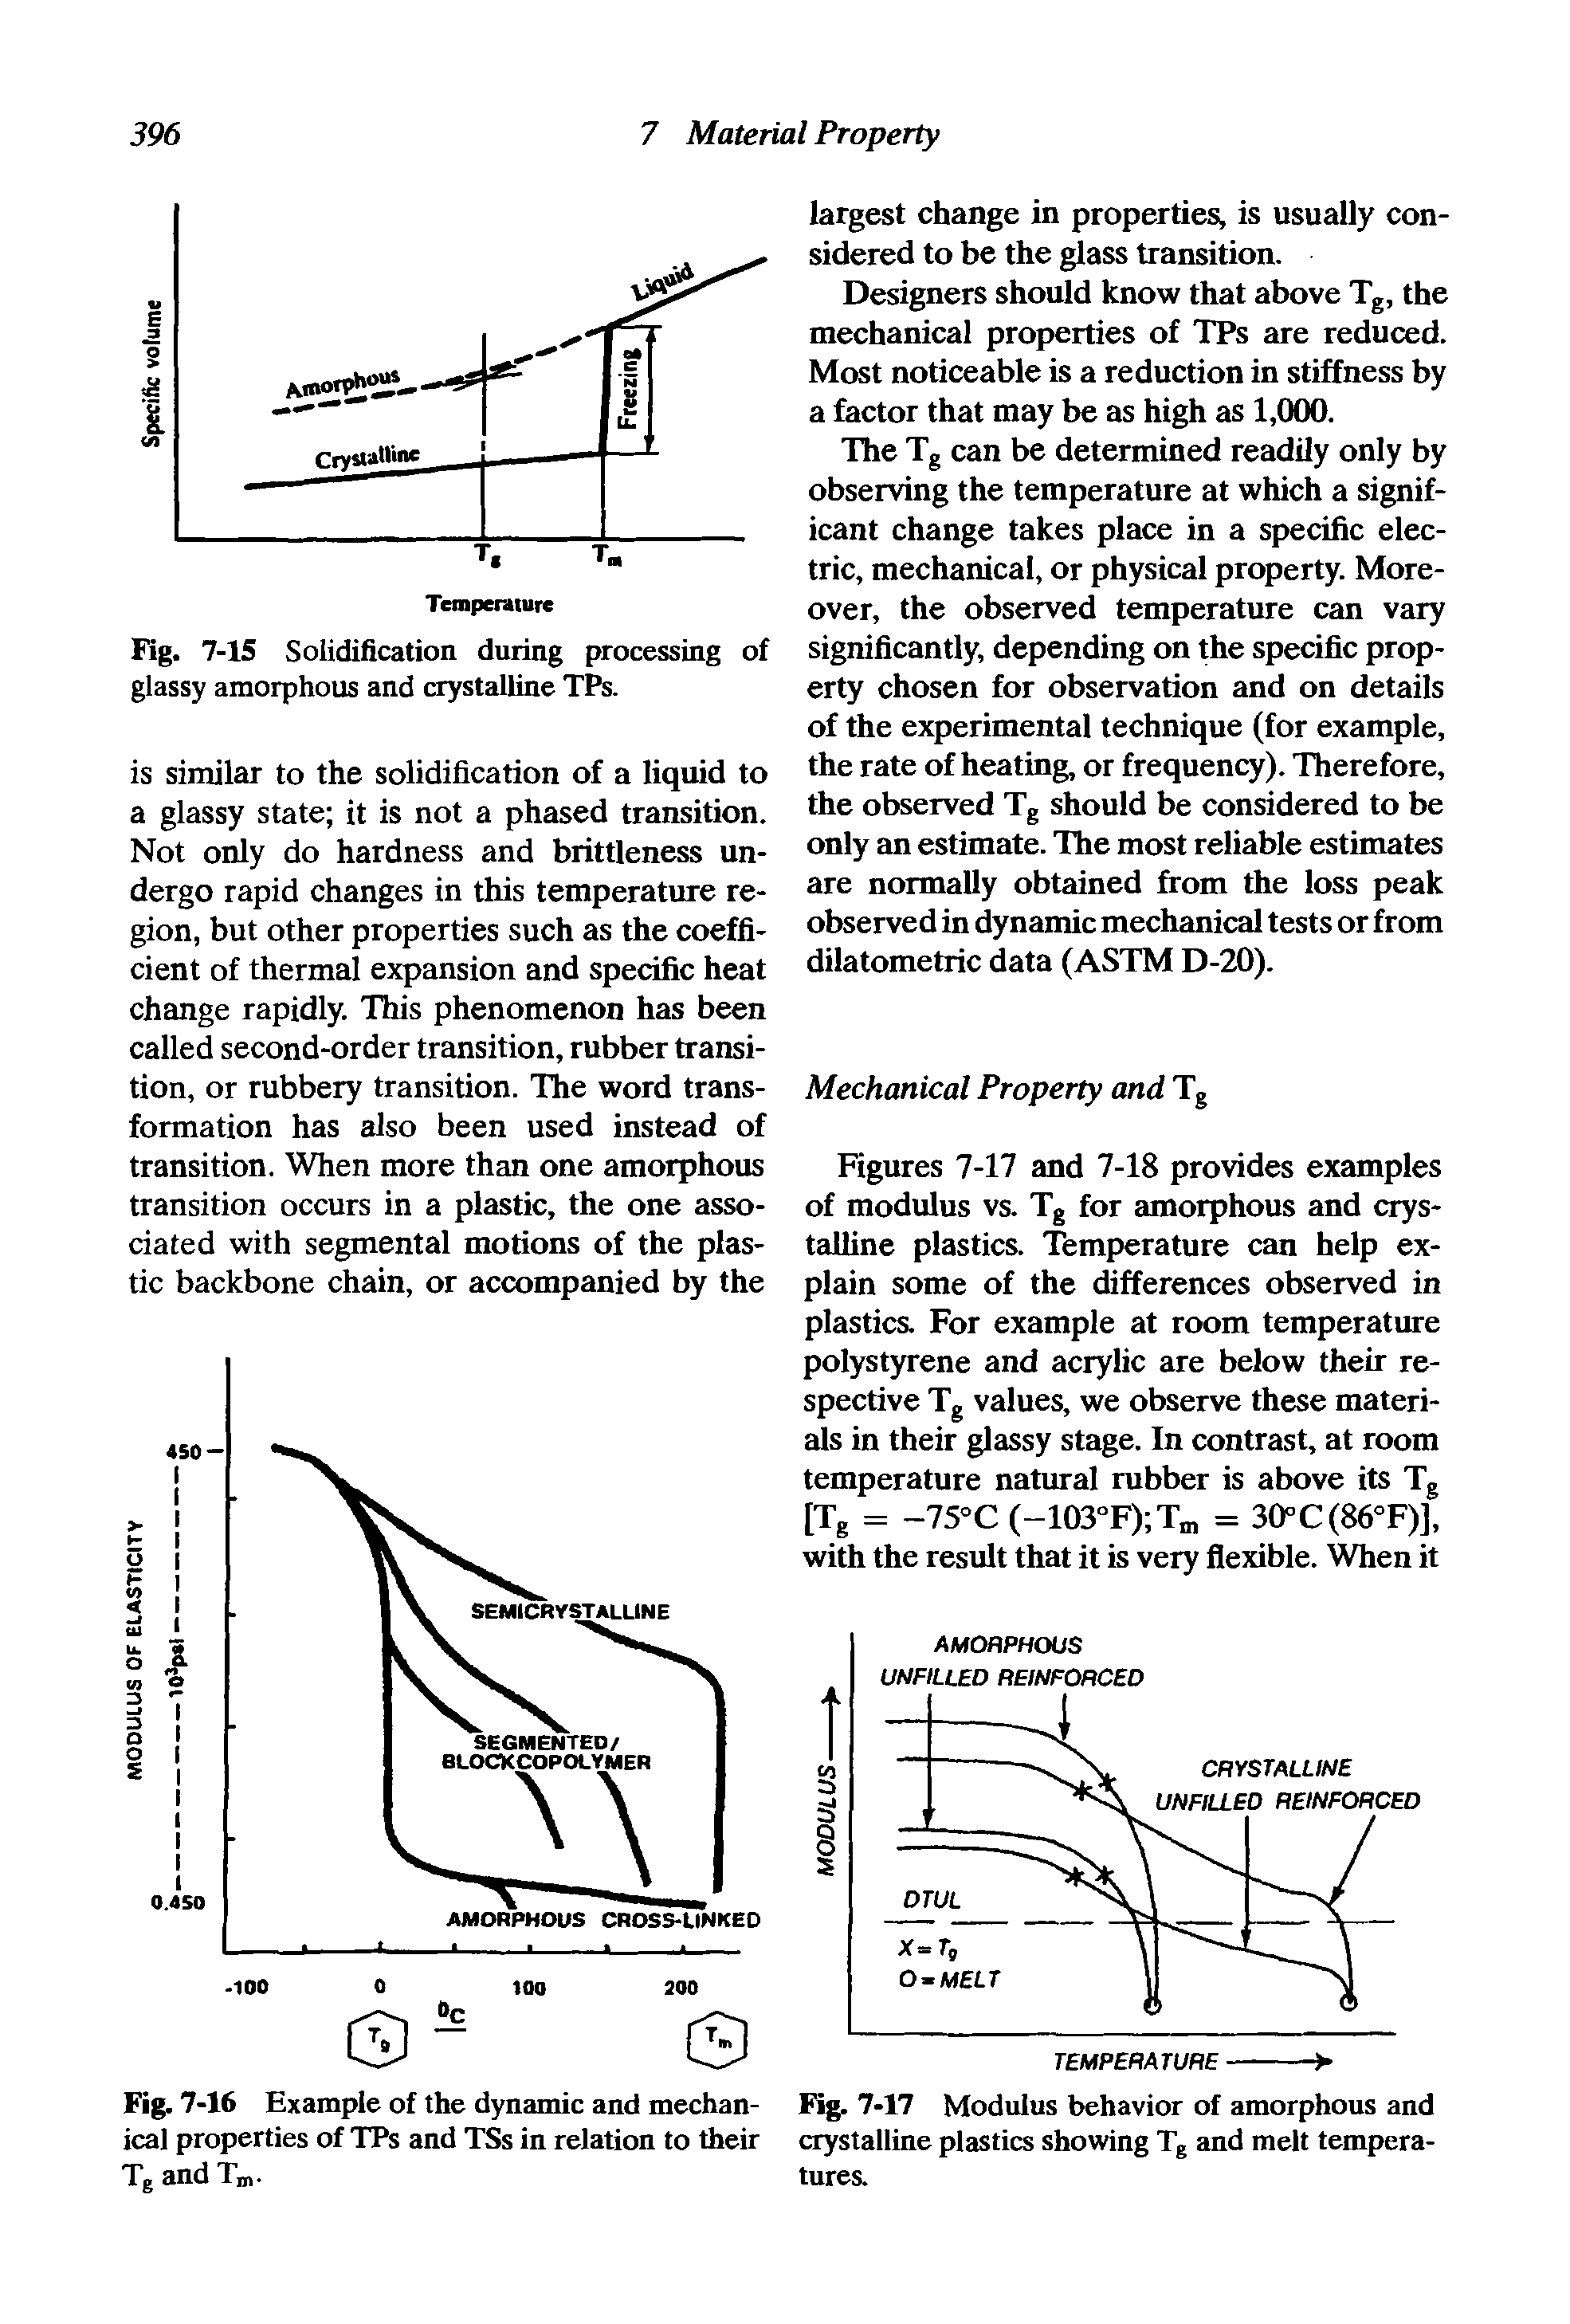 Figures 7-17 and 7-18 provides examples of modulus vs. Tg for amorphous and crystalline plastics. Temperature can help explain some of the differences observed in plastics. For example at room temperature polystyrene and acrylic are below their respective Tg values, we observe these materials in their glassy stage. In contrast, at room temperature natural rubber is above its Tg [Tg = —75°C (—103°F) Tm = 30°C(86°F)], with the result that it is very flexible. When it...